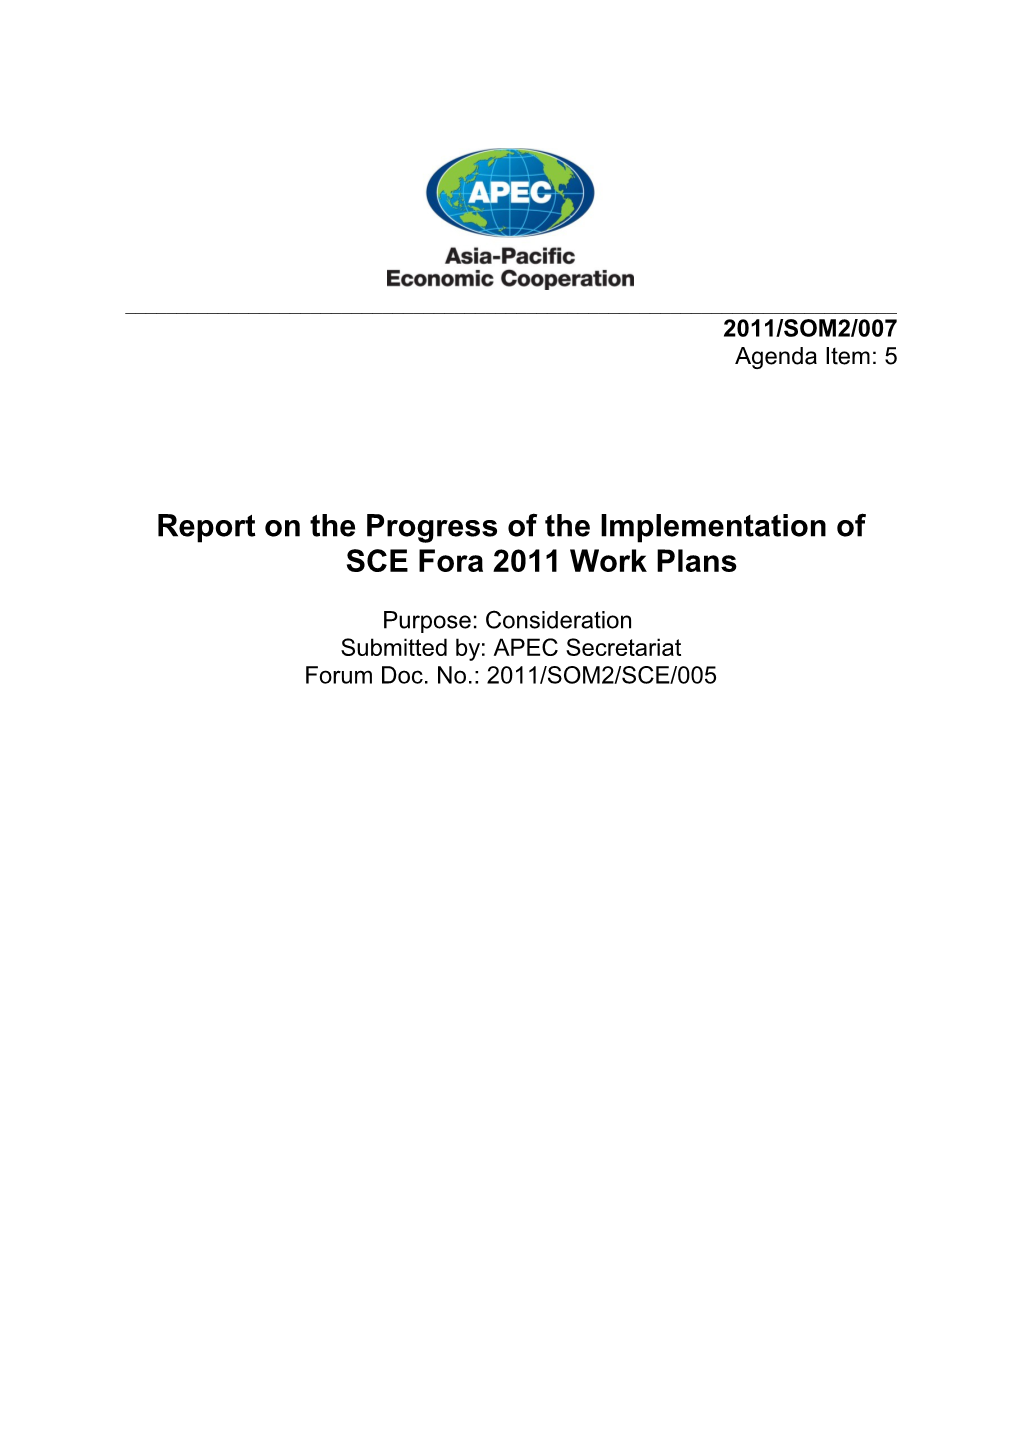 Report on the Progress of the Implementation of SCE Fora 2011 Work Plans